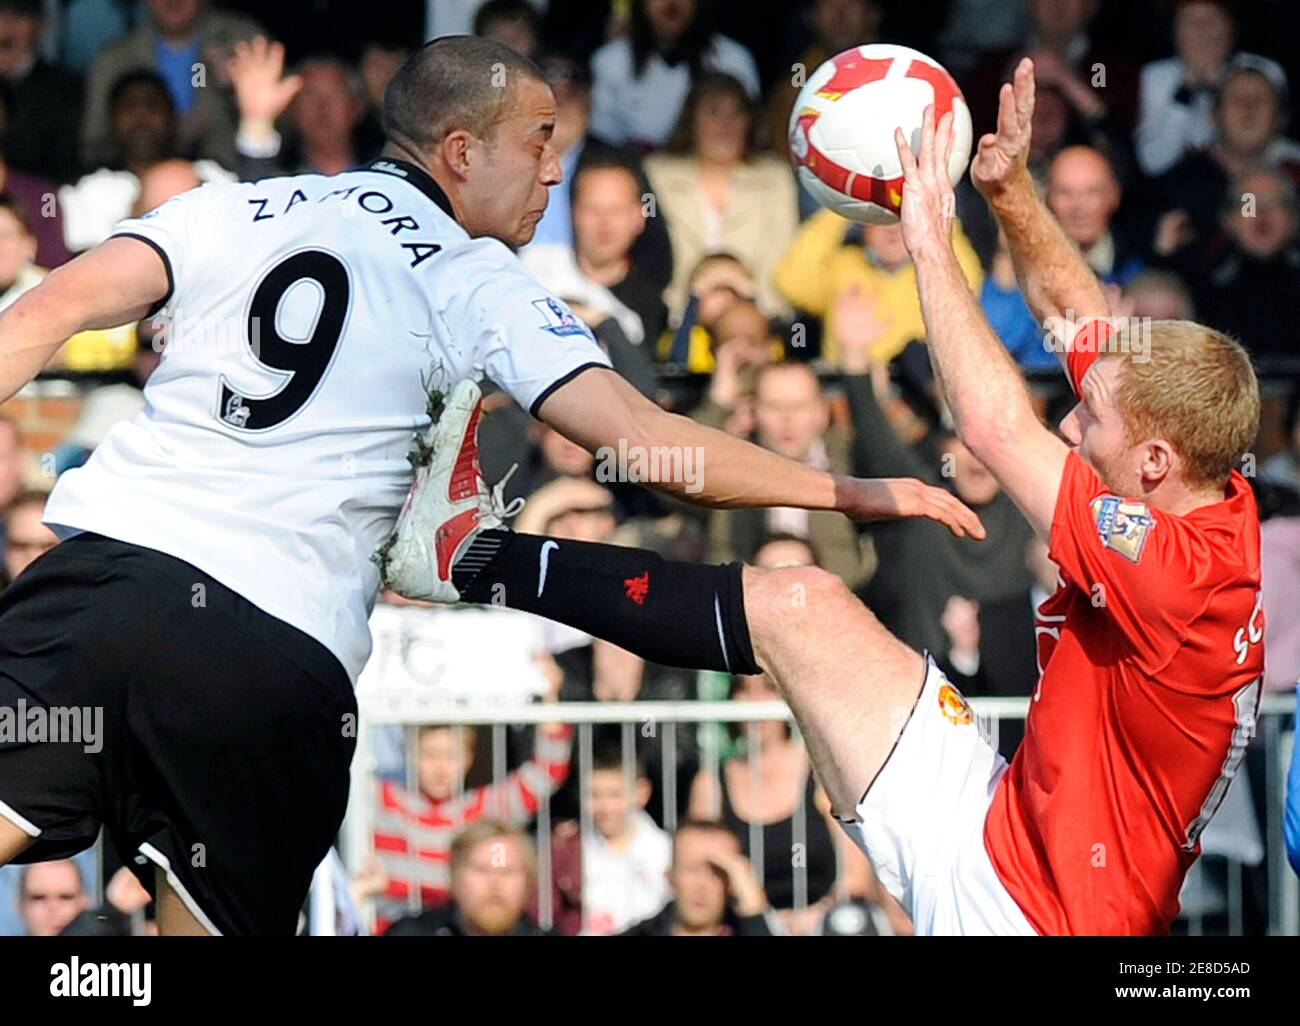 Manchester United's Paul Scholes (R) commits a handball foul and concedes a  penalty and is red-carded as Fulham's Bobby Zamora (L) heads goalwards  during their English Premier League soccer match against Fulham